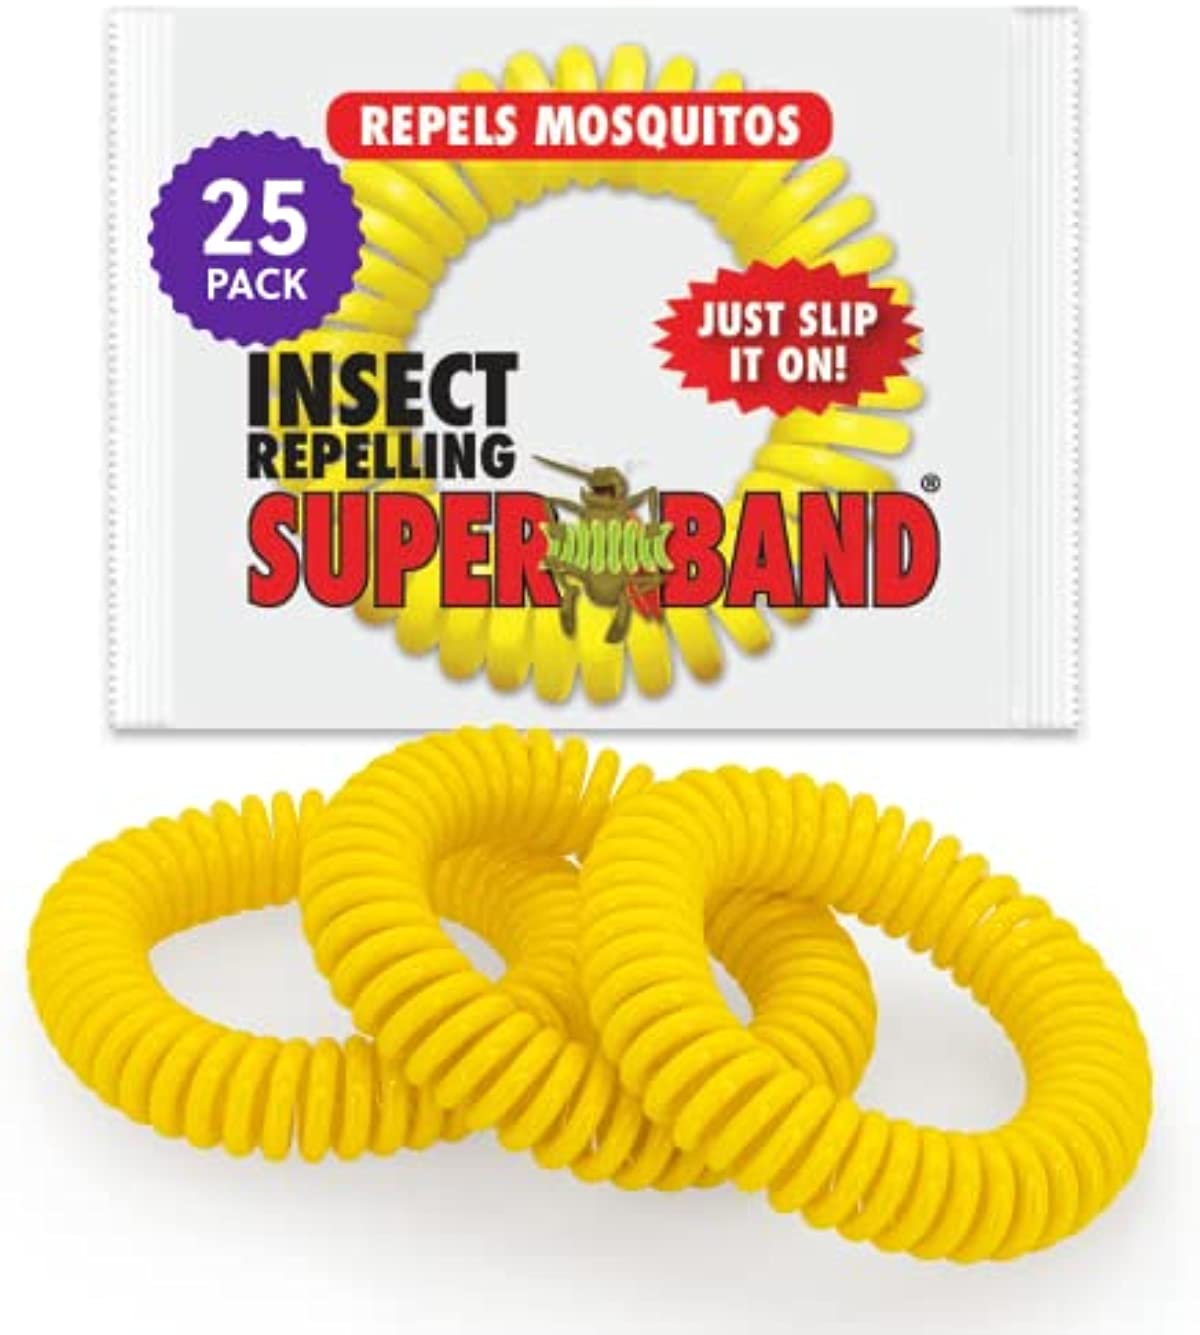 Superband Mosquito Repellent Bracelets for Adults & Kids - Pack of 25 - Long Lasting, Natural Bug and Insect Repellent Bracelet - Waterproof, Individually Wrapped, Deet-Free Bands - Yellow